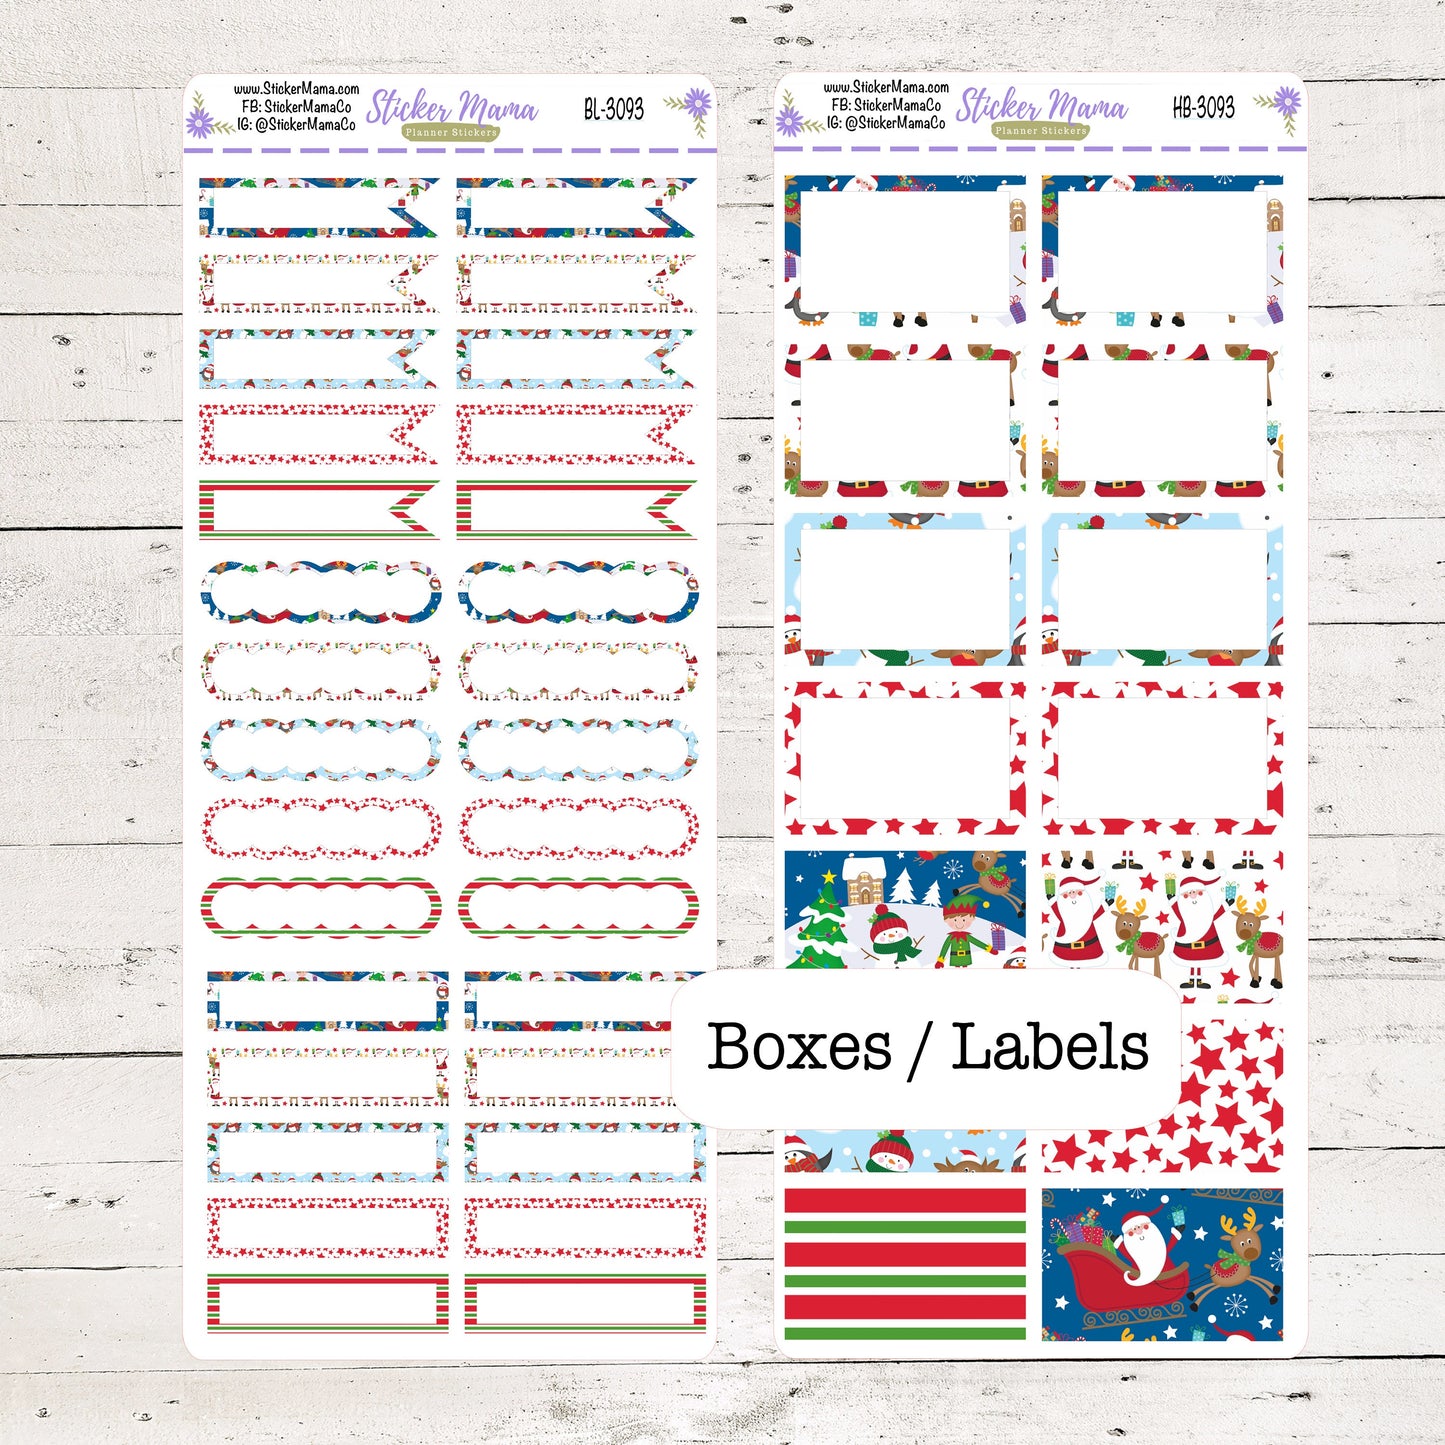 BL-3093 - HB-3093 BASIC Label Stickers - Holly Jolly - Half Boxes - Planner Stickers - Full Box for Planners